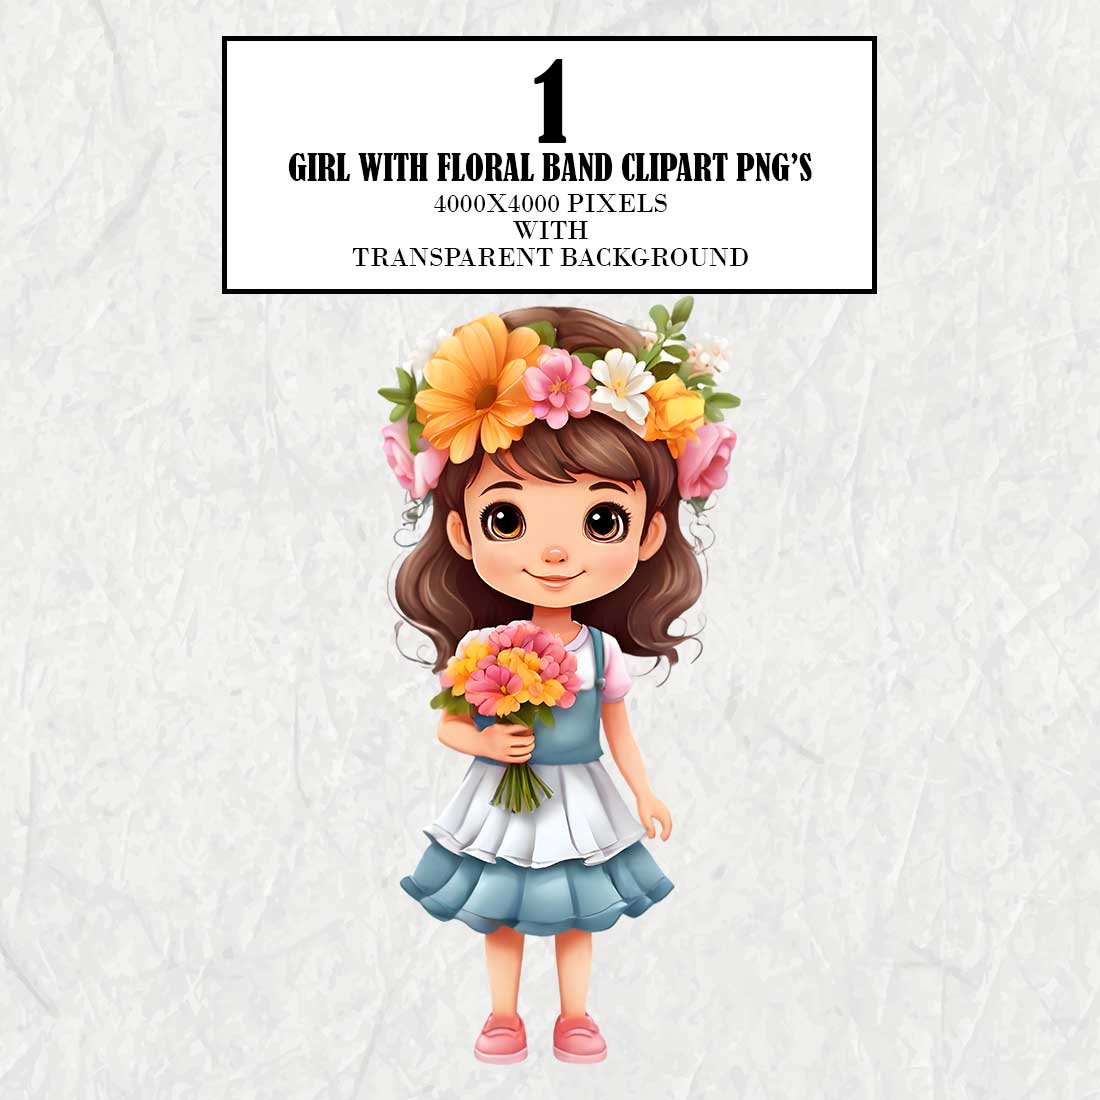 Girl With Floral Band Clipart cover image.